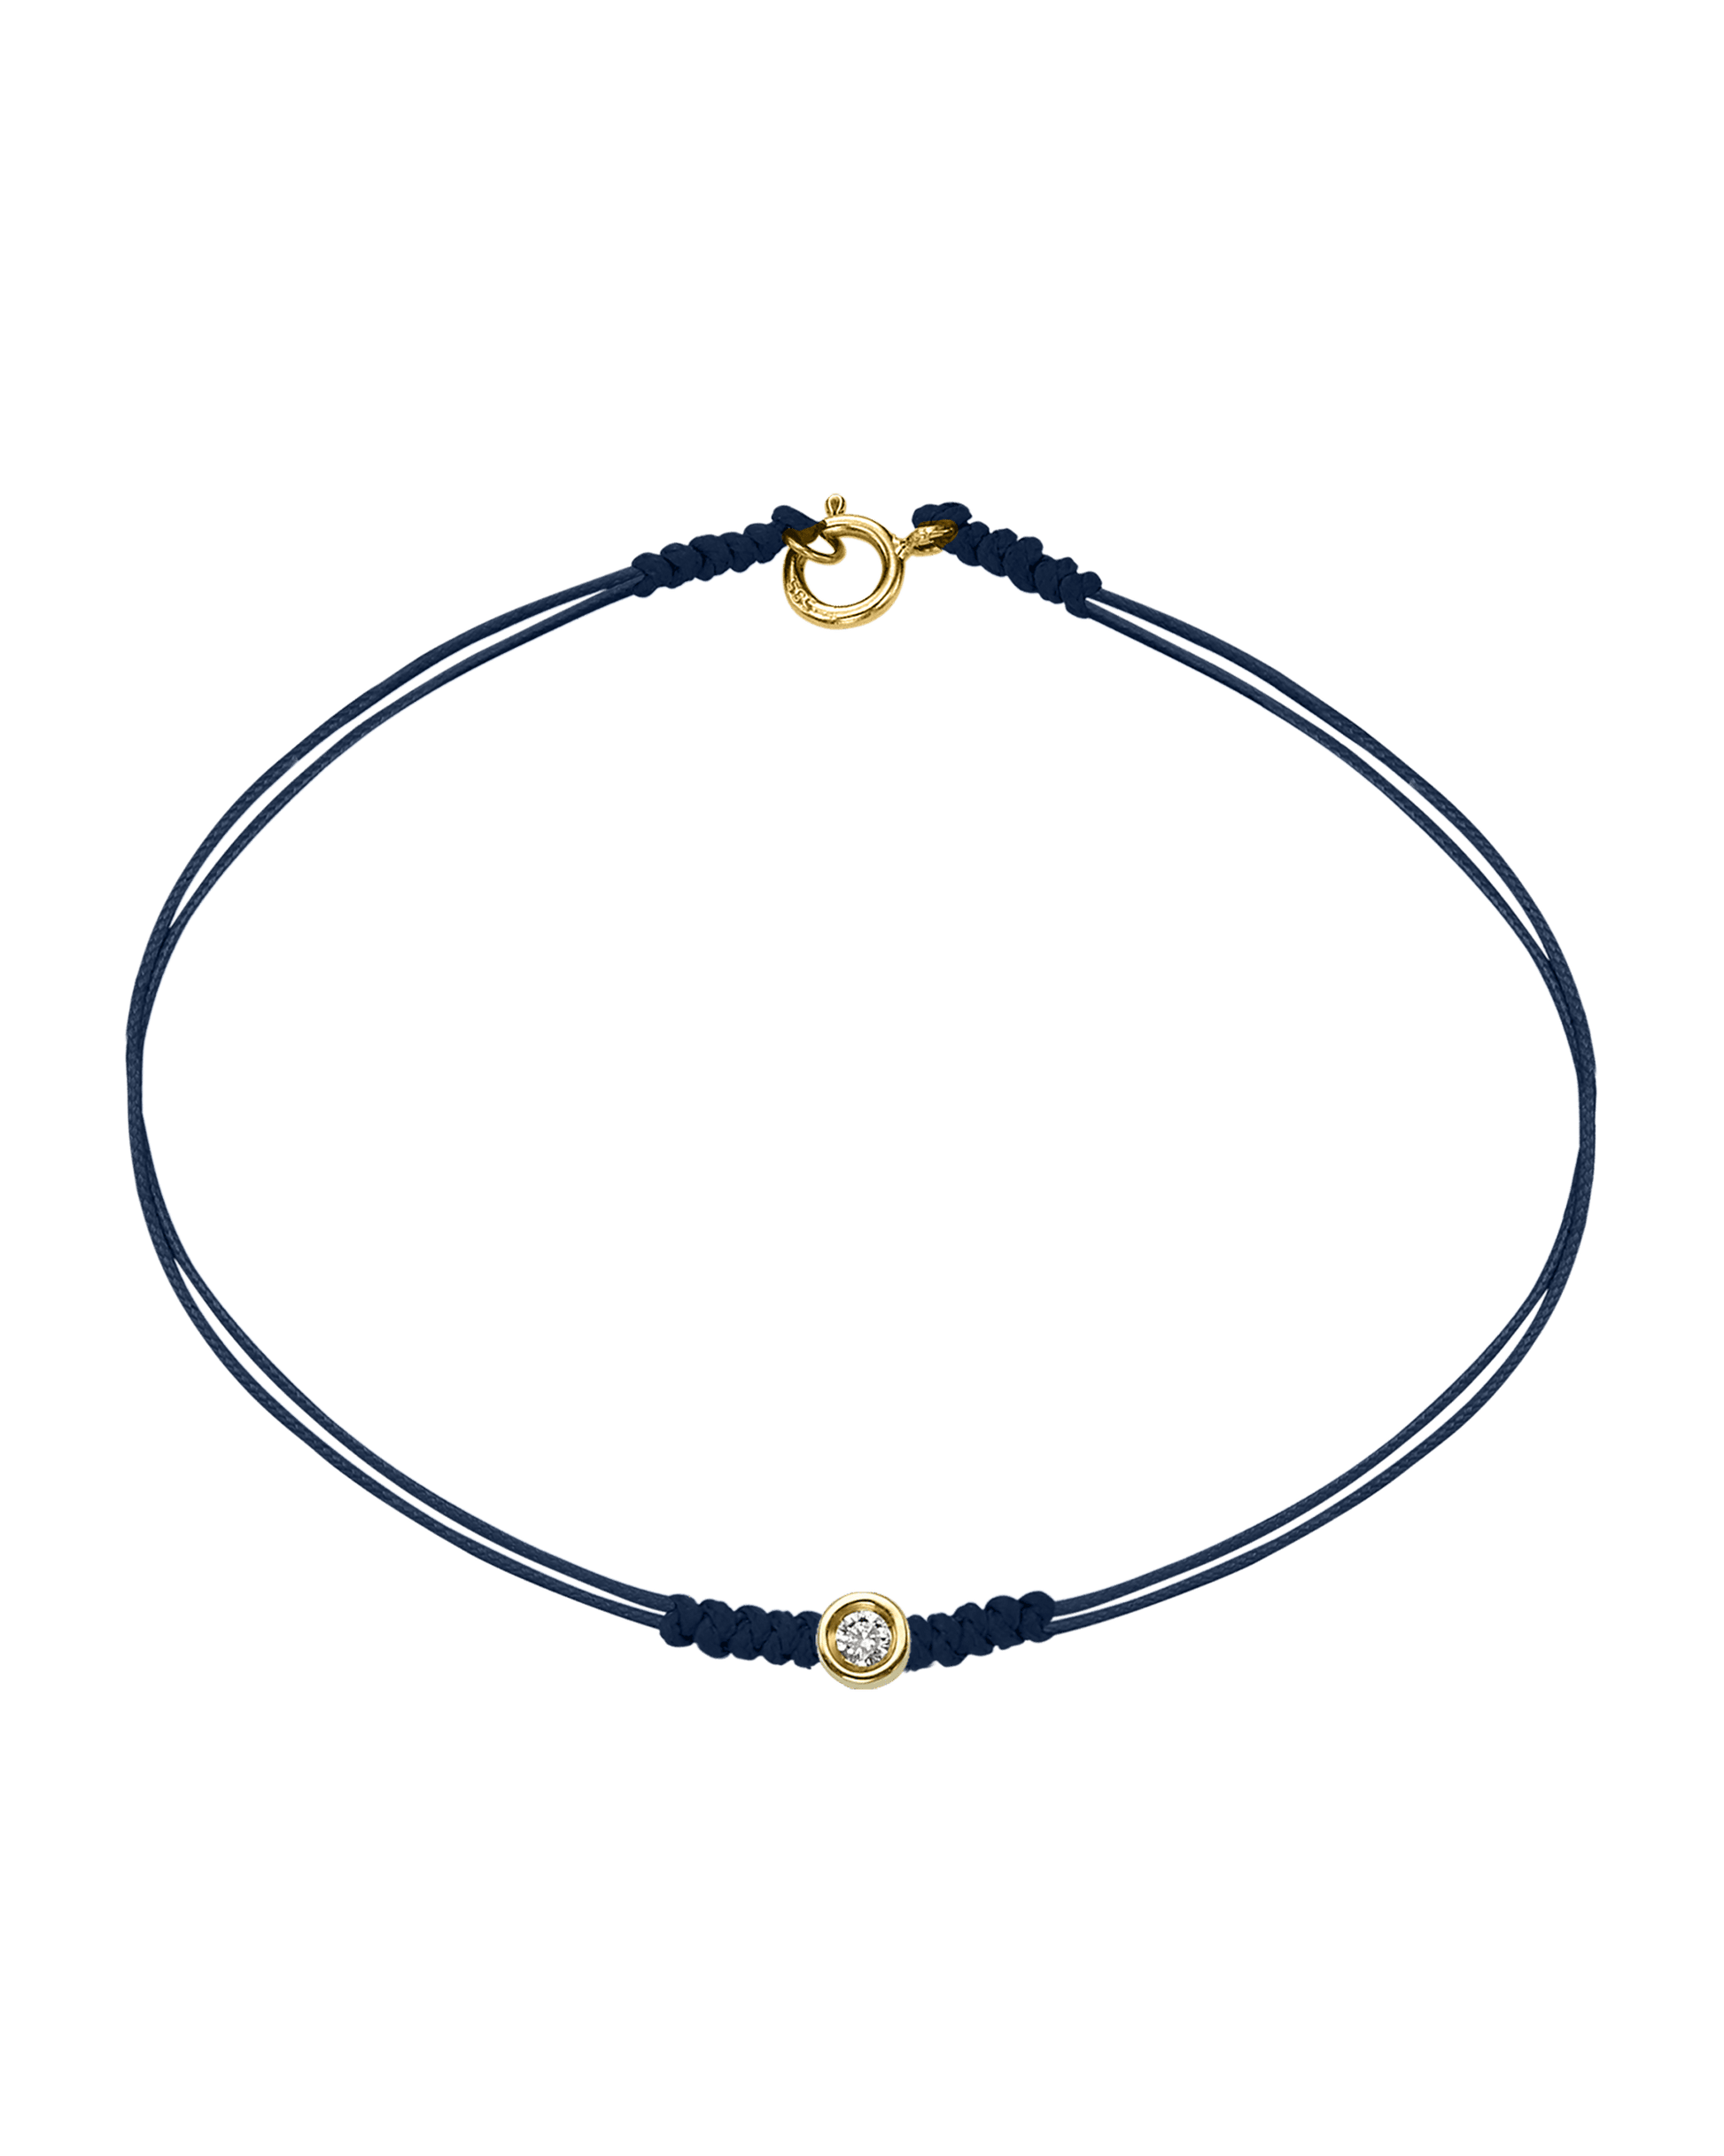 The Classic String of Love with clasp - 14K Yellow Gold Bracelets 14K Solid Gold Navy Blue Small: 0.03ct Small - 6 Inches (15.5cm)